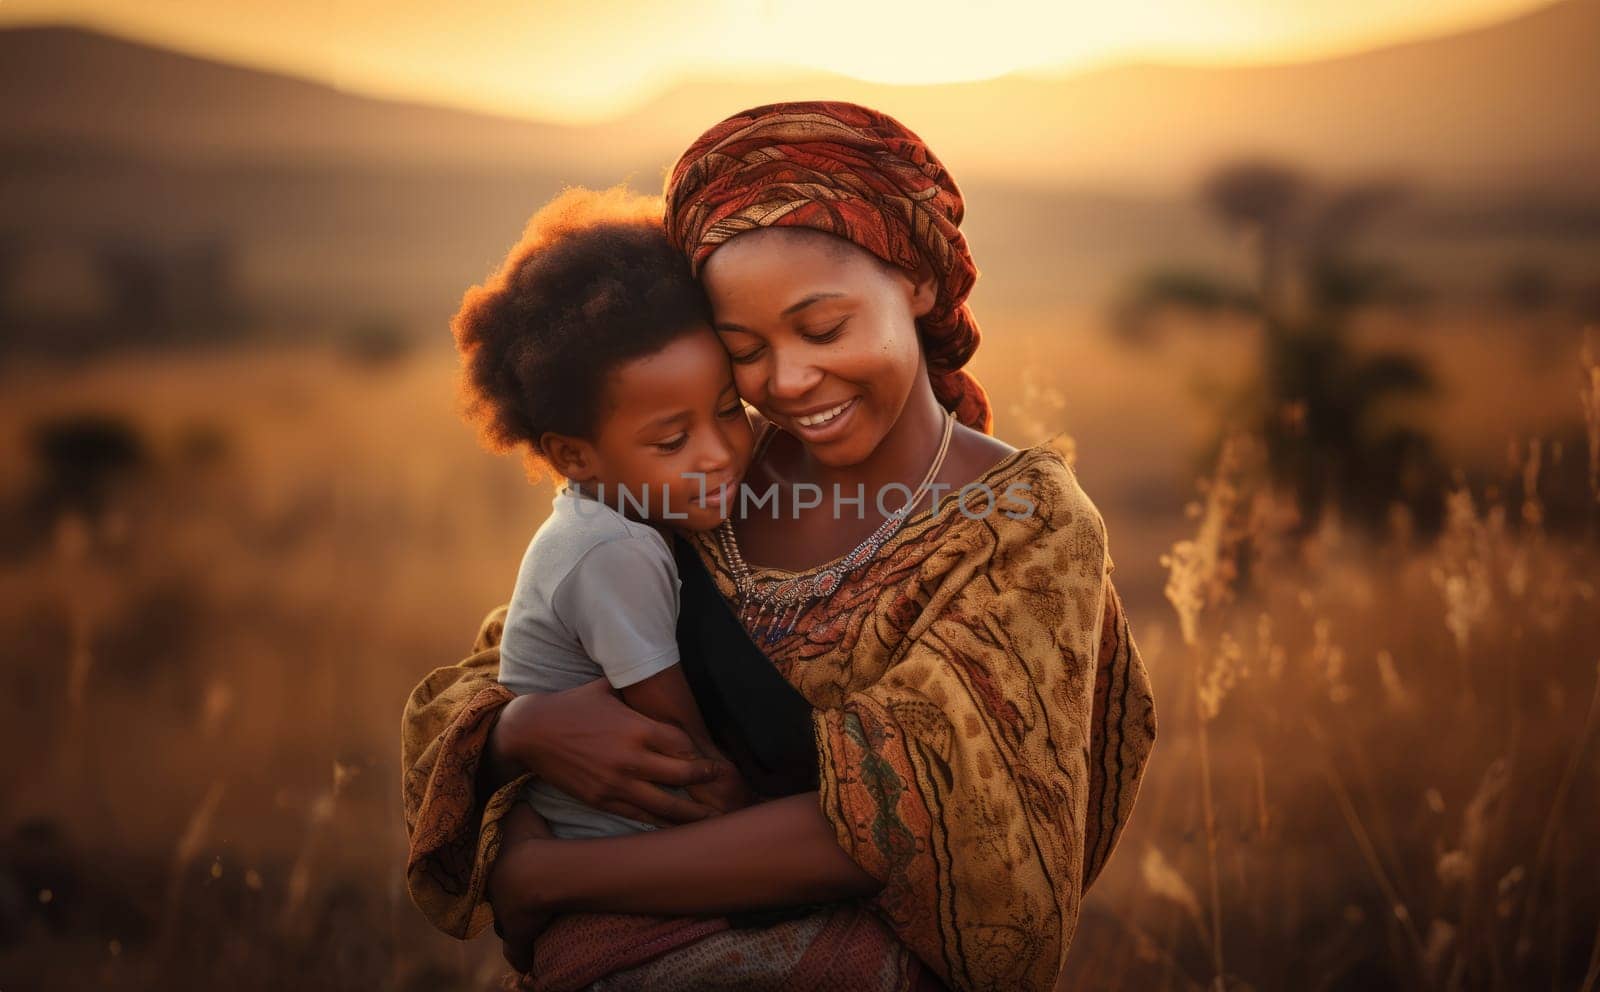 A beautiful celebration of cultural heritage, an African-American mother tenderly embraces her child while adorned in traditional African attire, symbolizing the richness of their shared ancestry and pride.